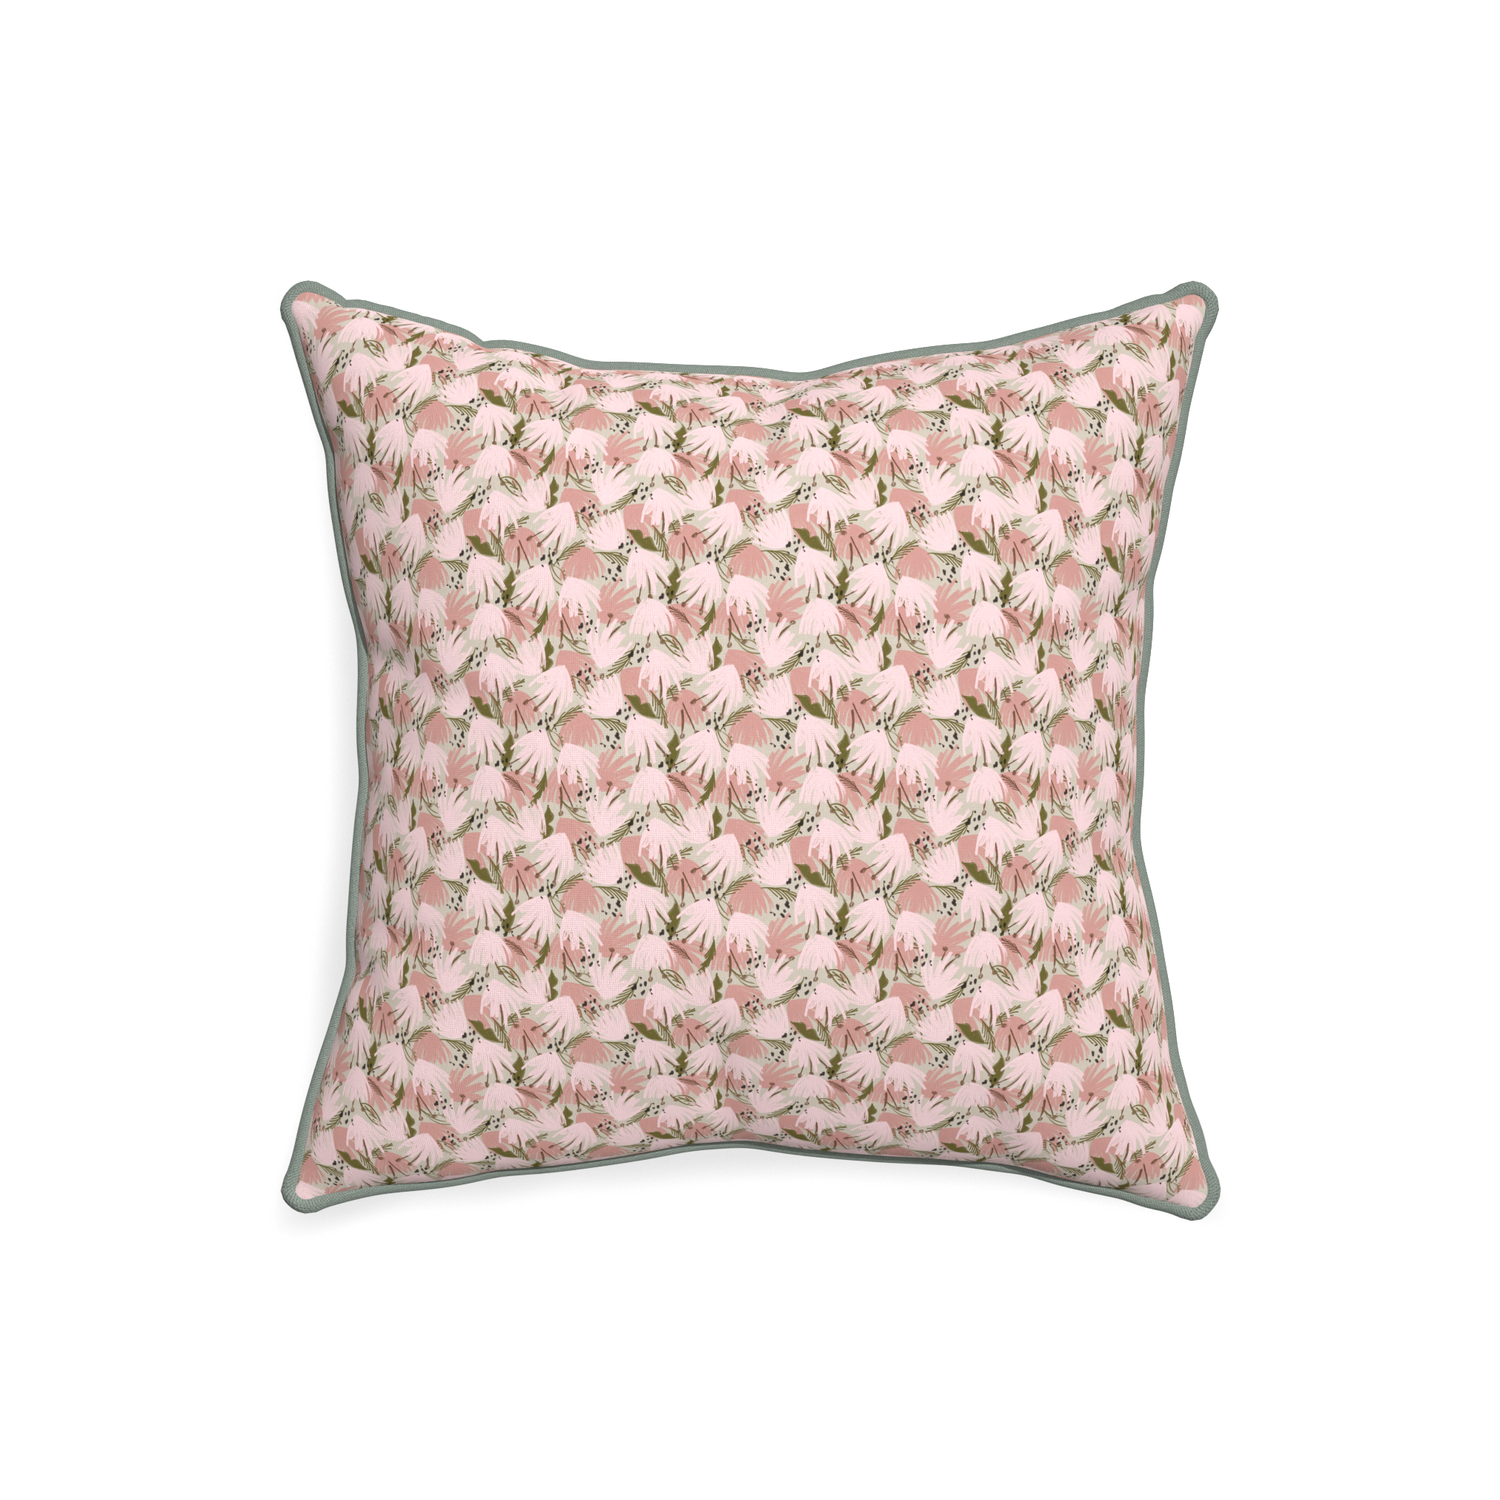 20-square eden pink custom pink floralpillow with sage piping on white background